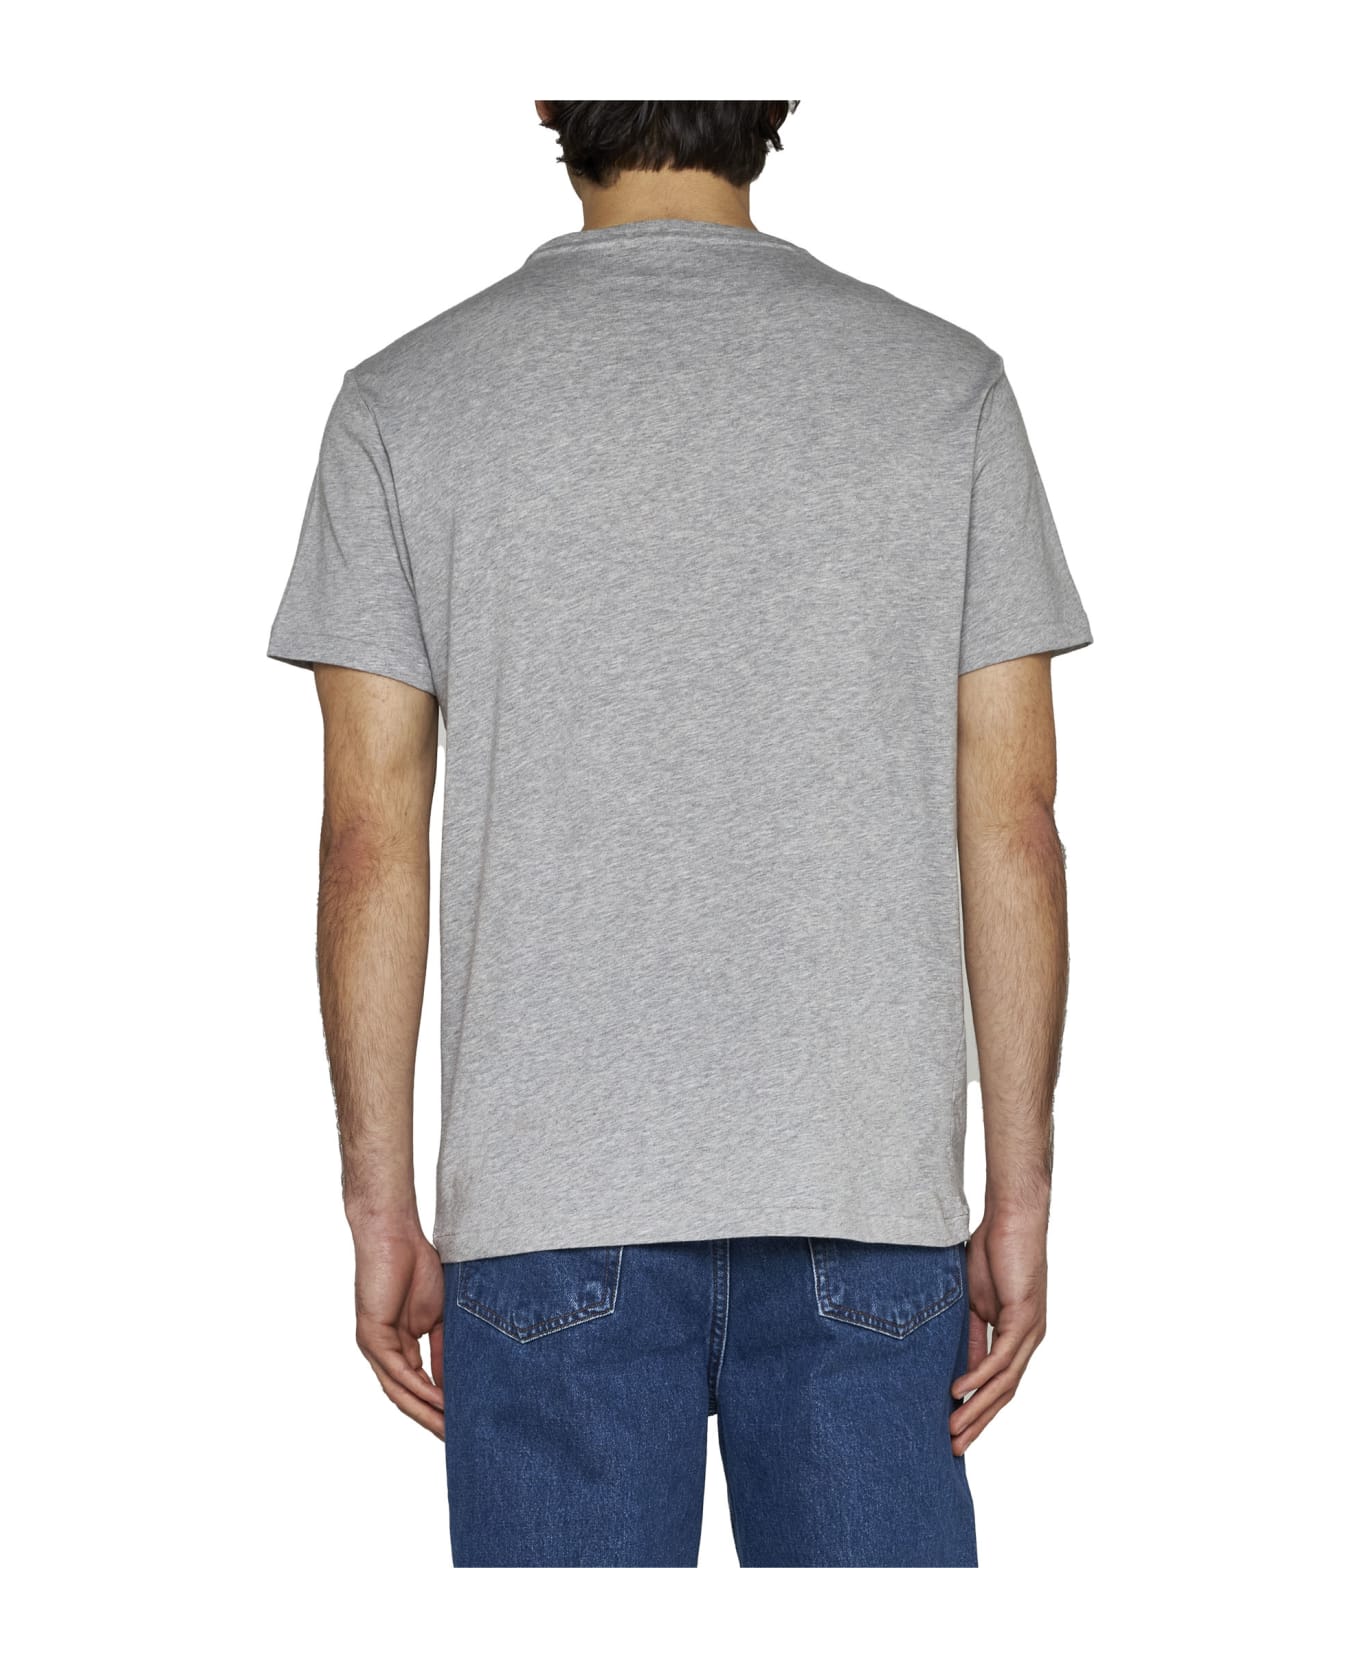 Polo Ralph Lauren T-Shirt - A 16 ply wool sweater featuring a polo neck and long sleeves